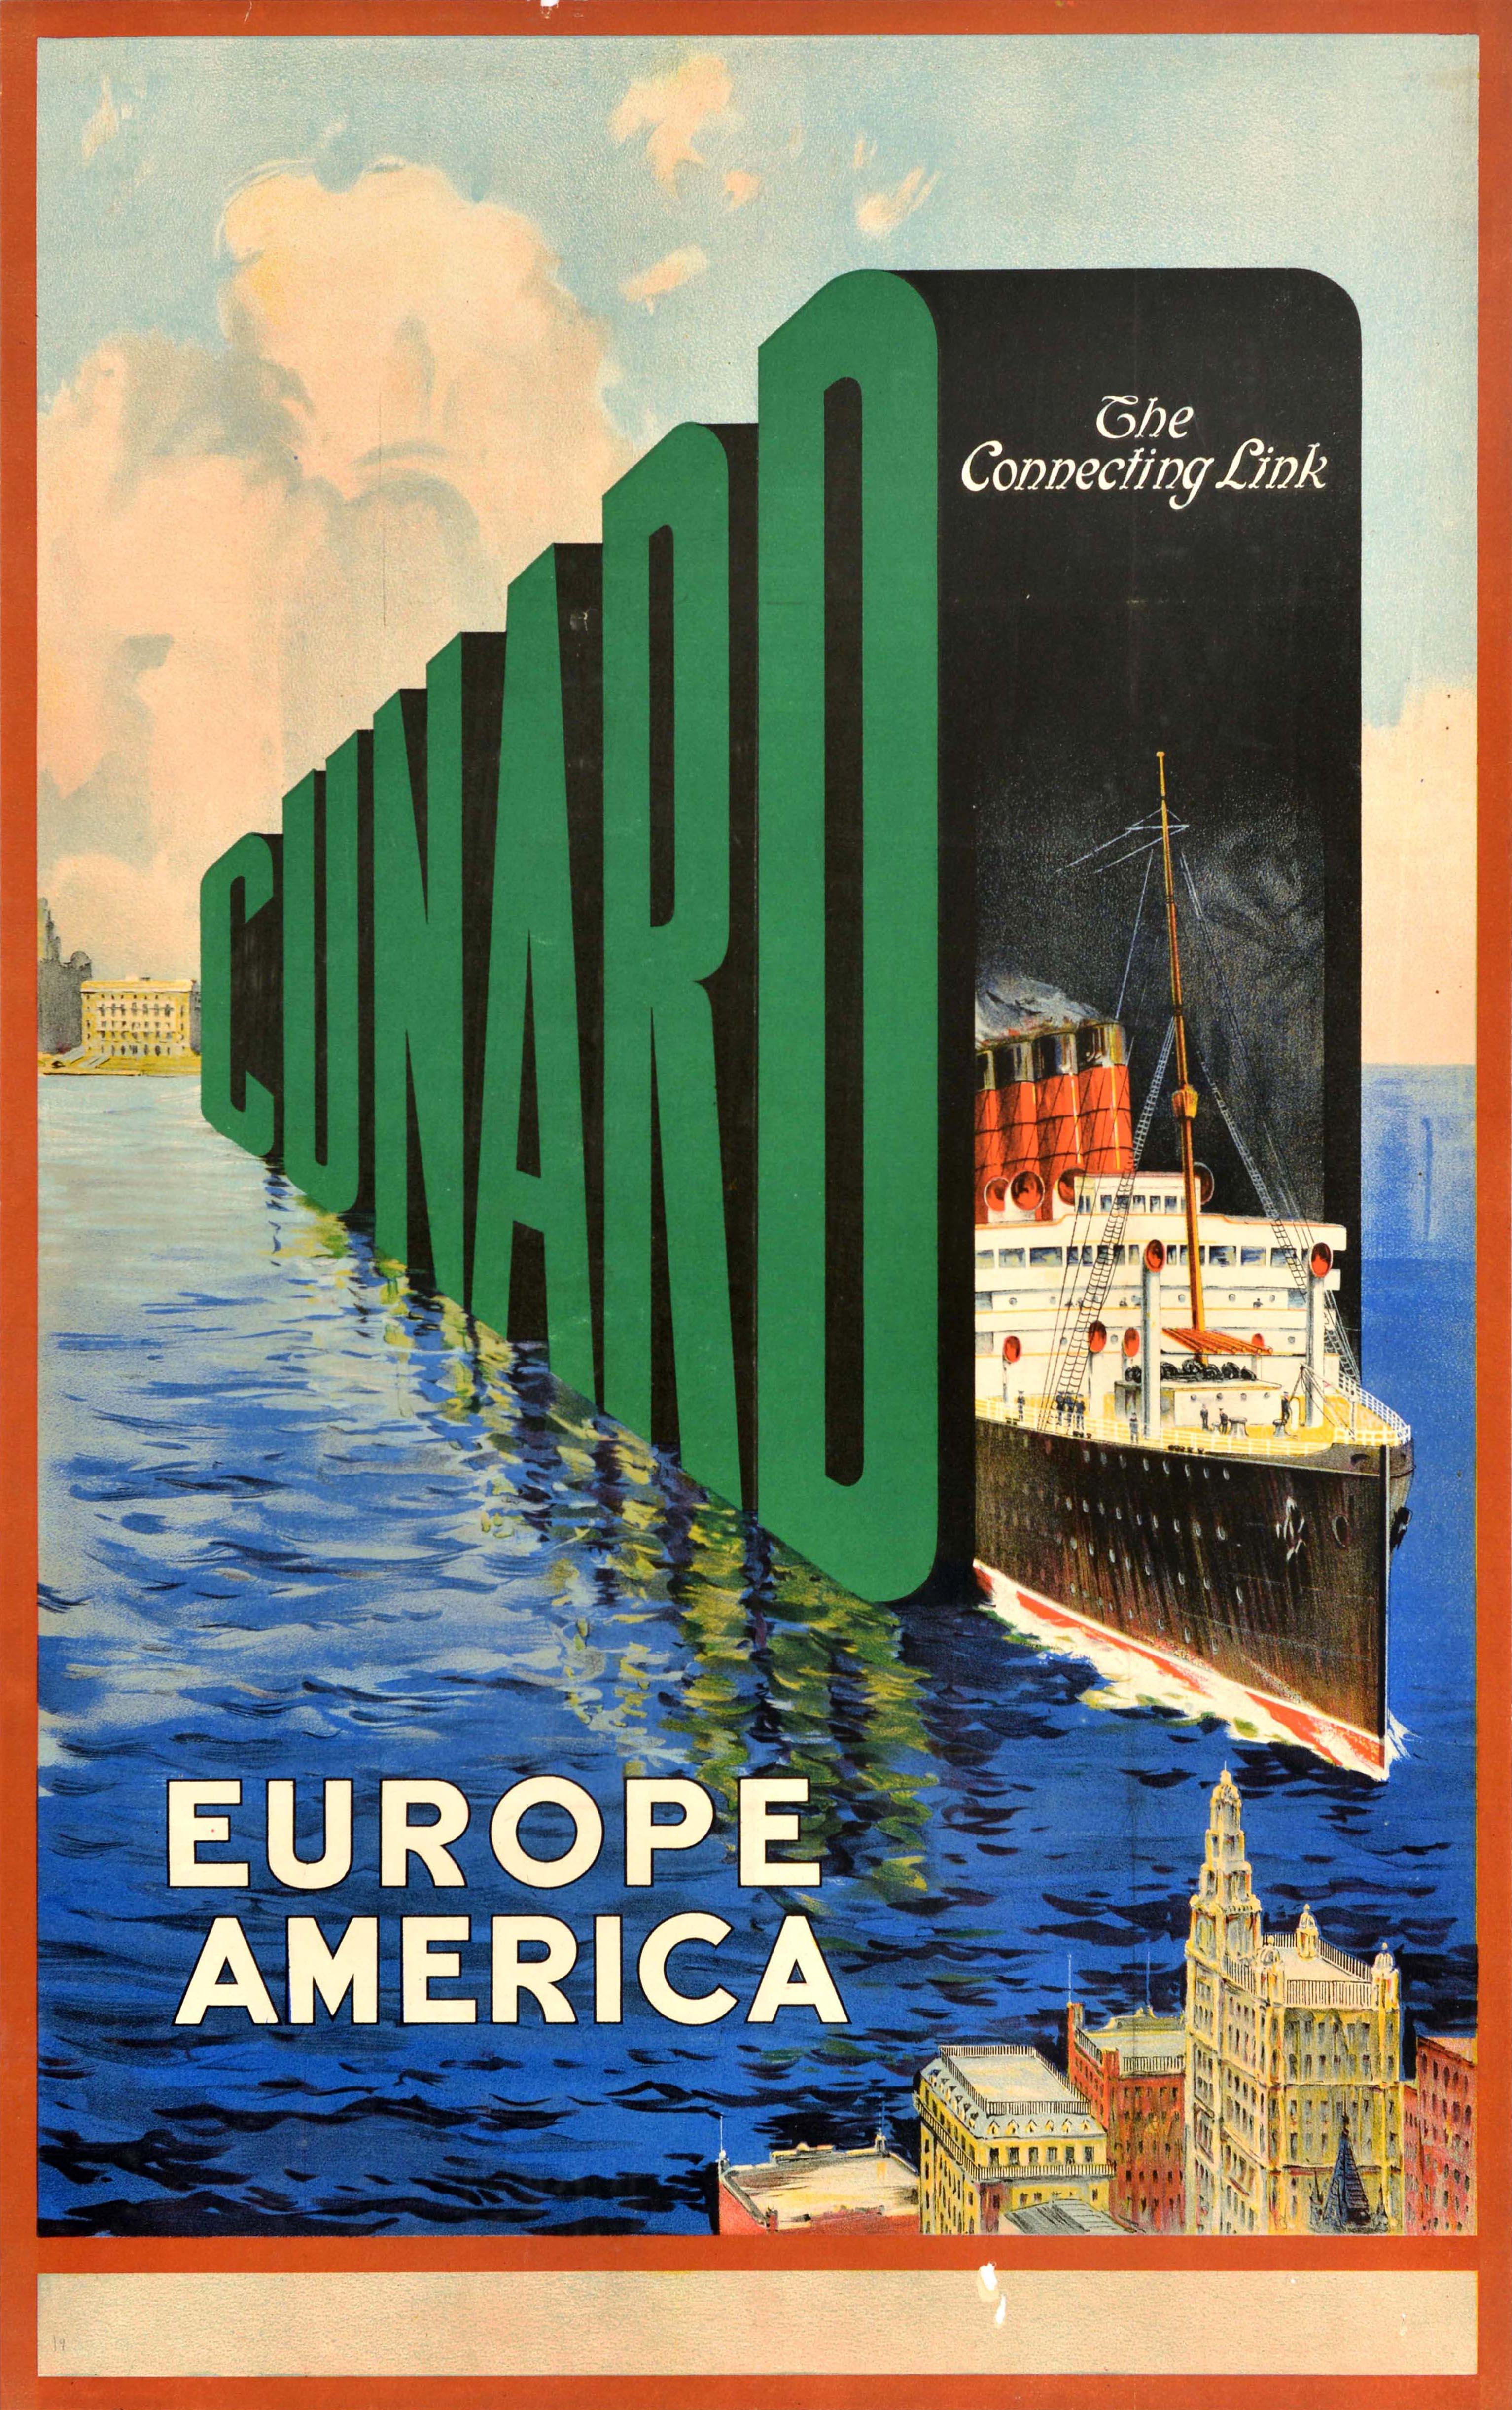 Unknown Print – Original Vintage Cruise Travel Poster Cunard The Connecting Link Europa Amerika